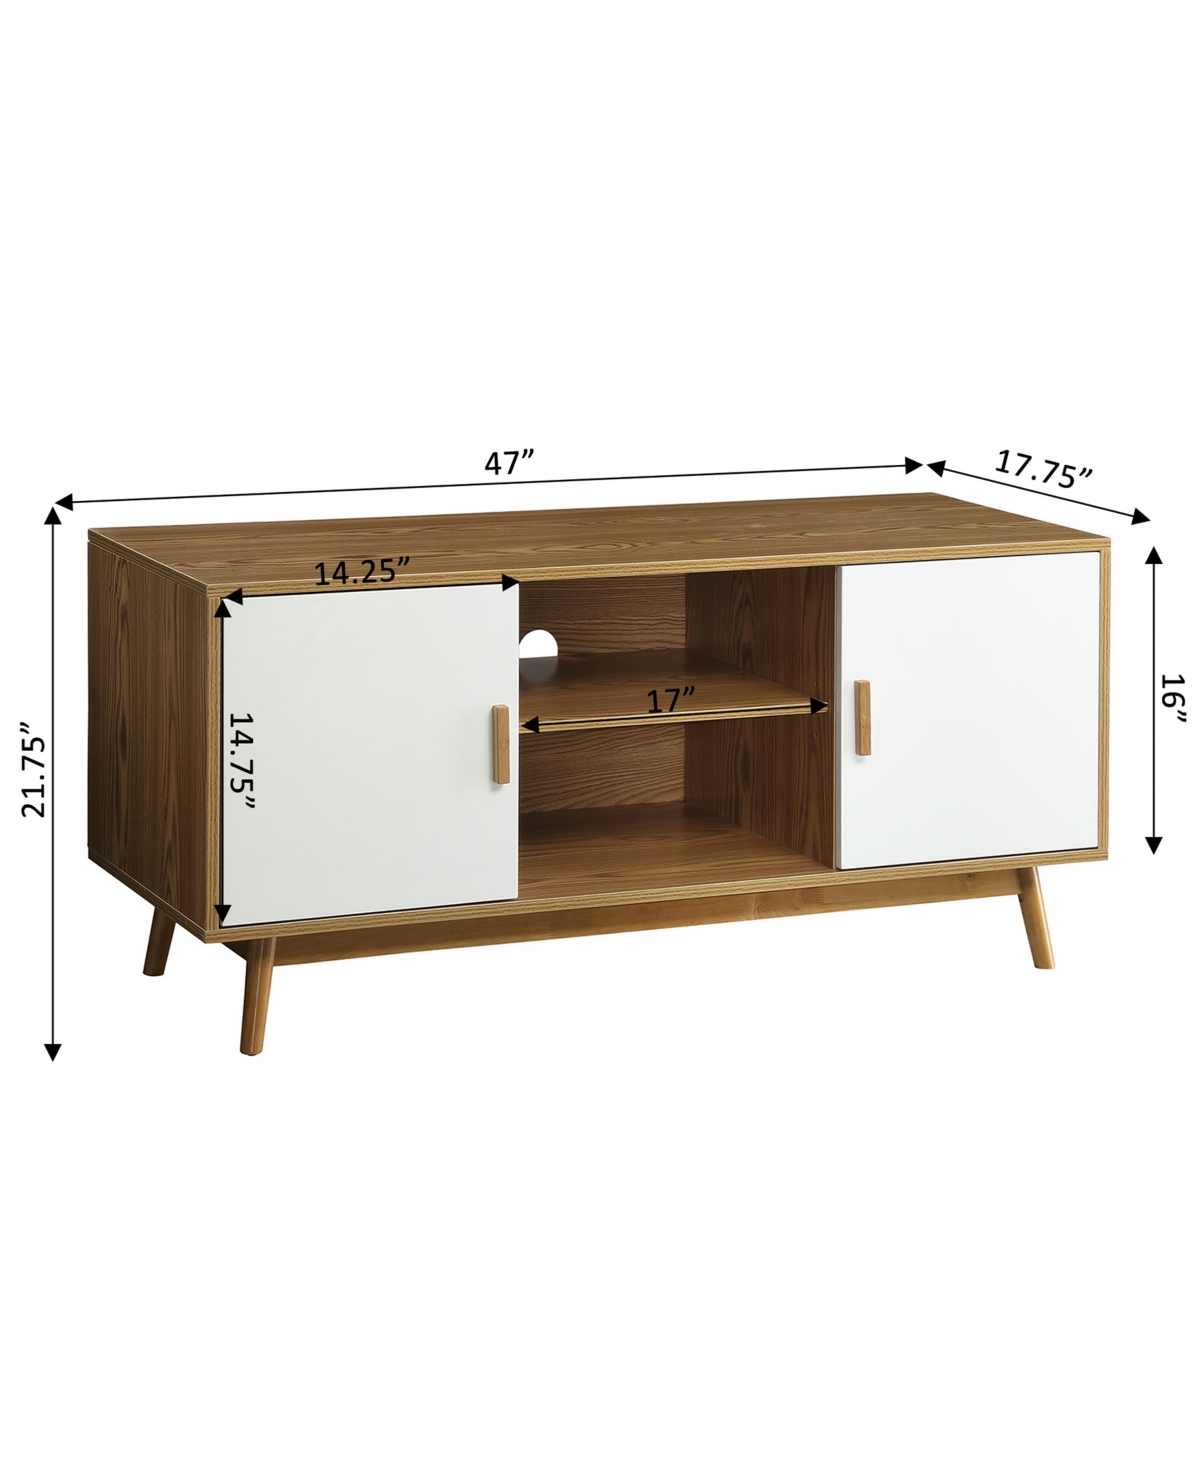 Shop Convenience Concepts 47.25" Oslo Tv Stand With Storage Cabinets And Shelves In Woodgrain